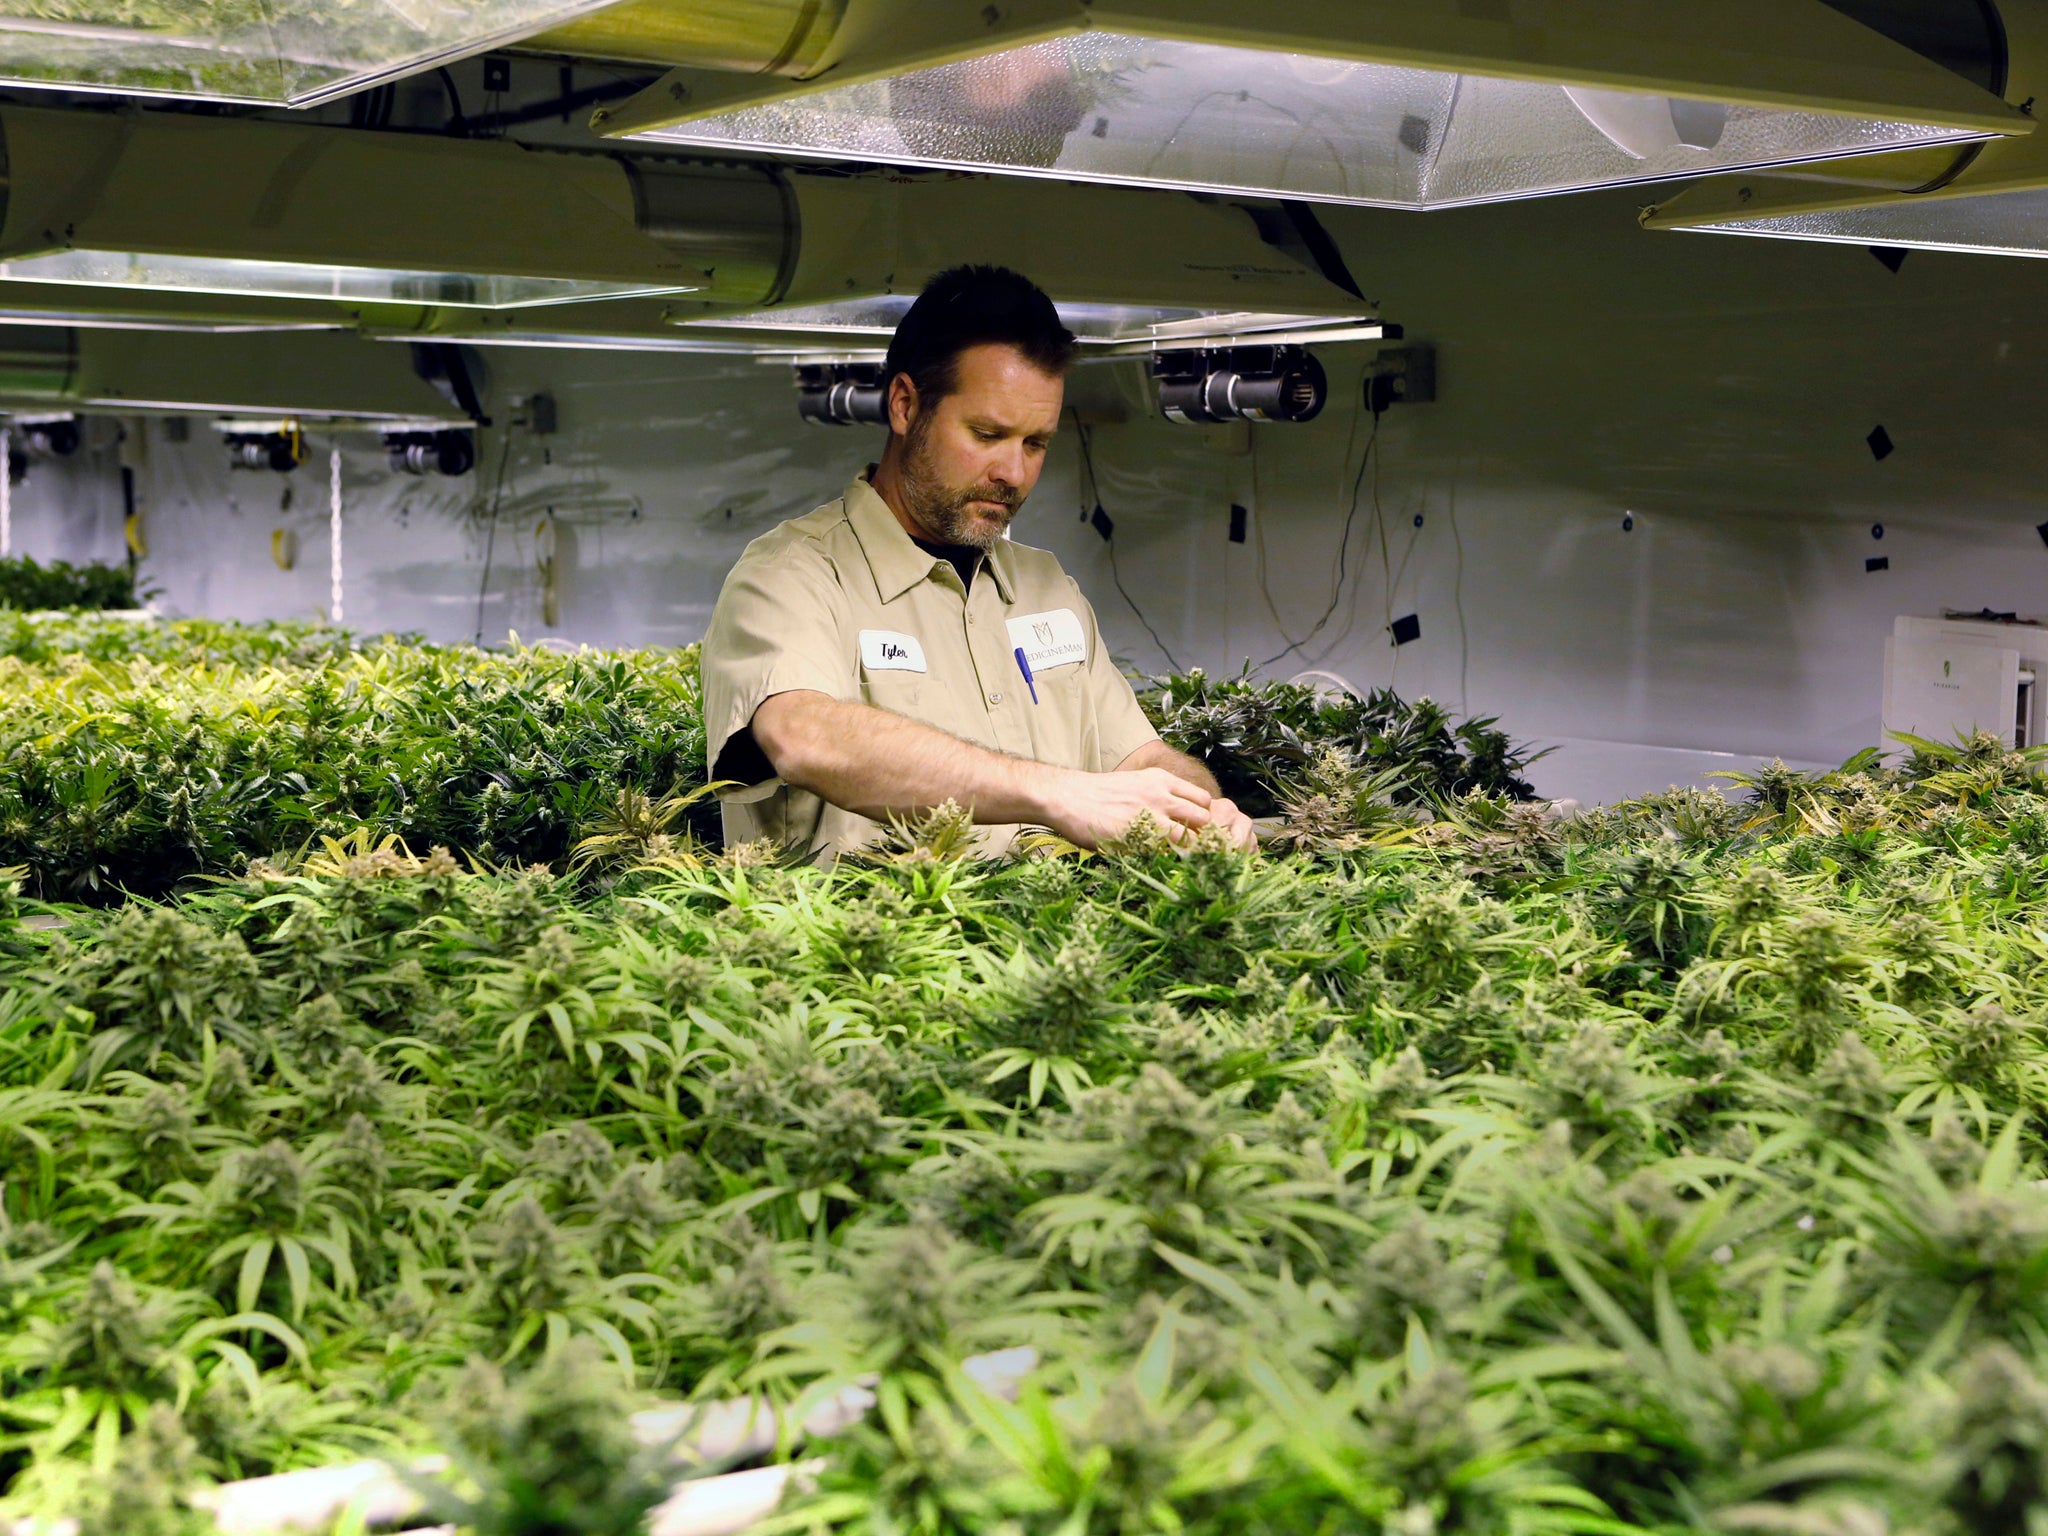 A worker at Medicine Man inspects inspects plants as they mature at the dispensary and grow operation in Denver